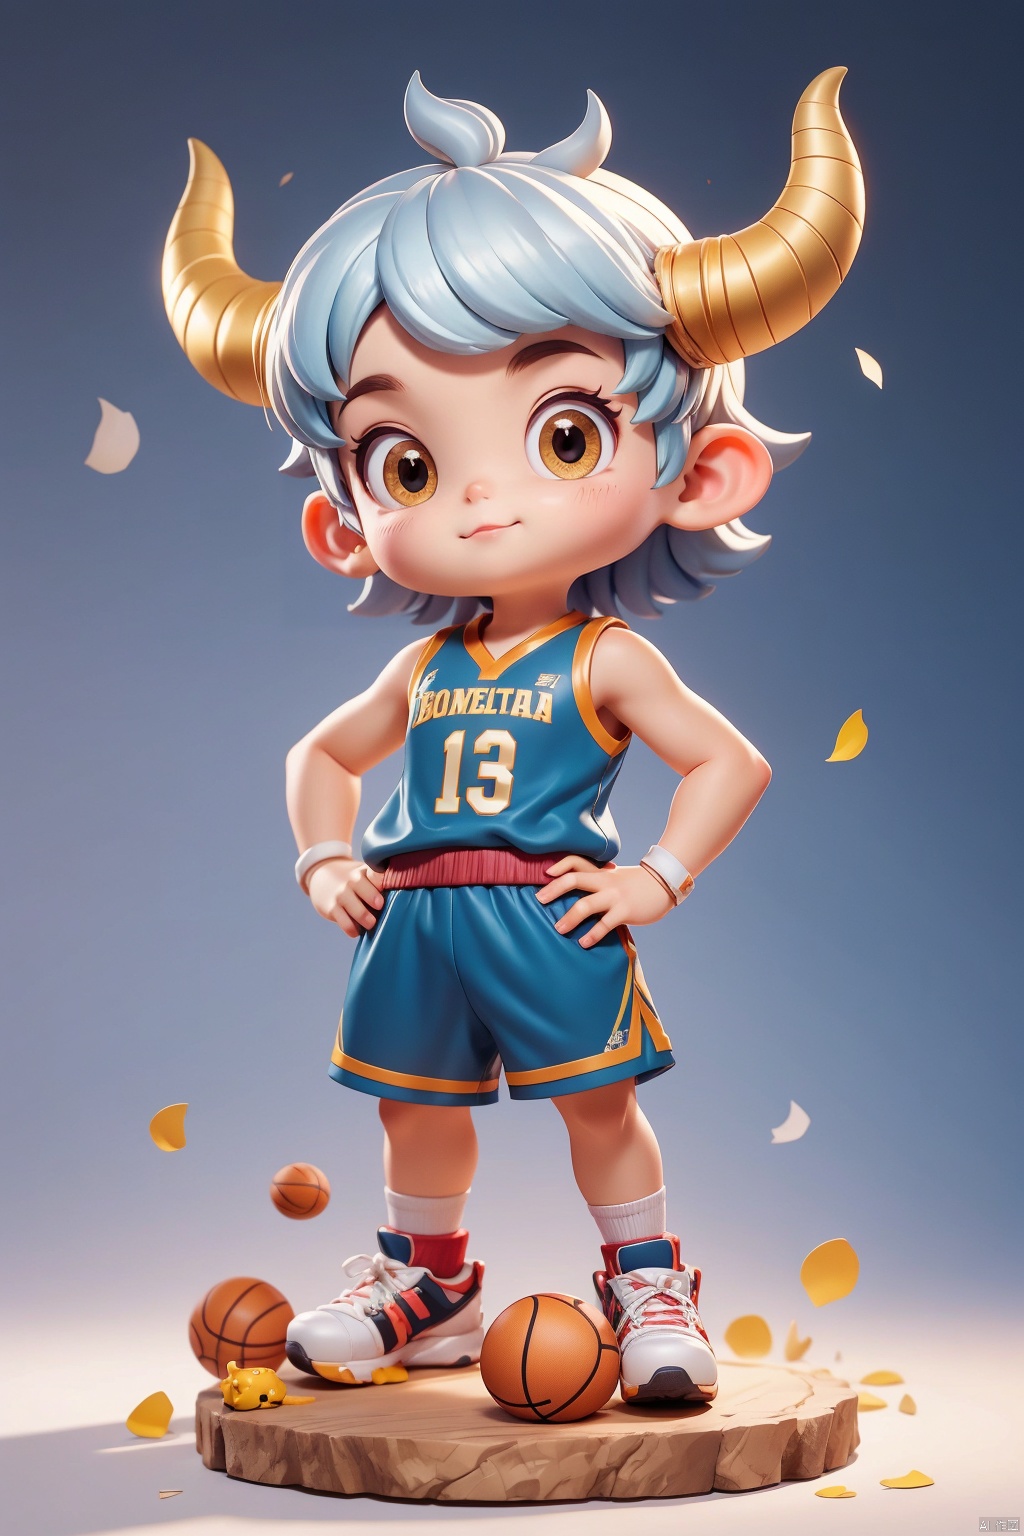 1 little boy, 3 years old, Animal IP, solo, (Q version :0.9), determined expression, horns, blush, basketball uniform, athlete figure, simple background, silver hair, American buzz cut, hands on hips